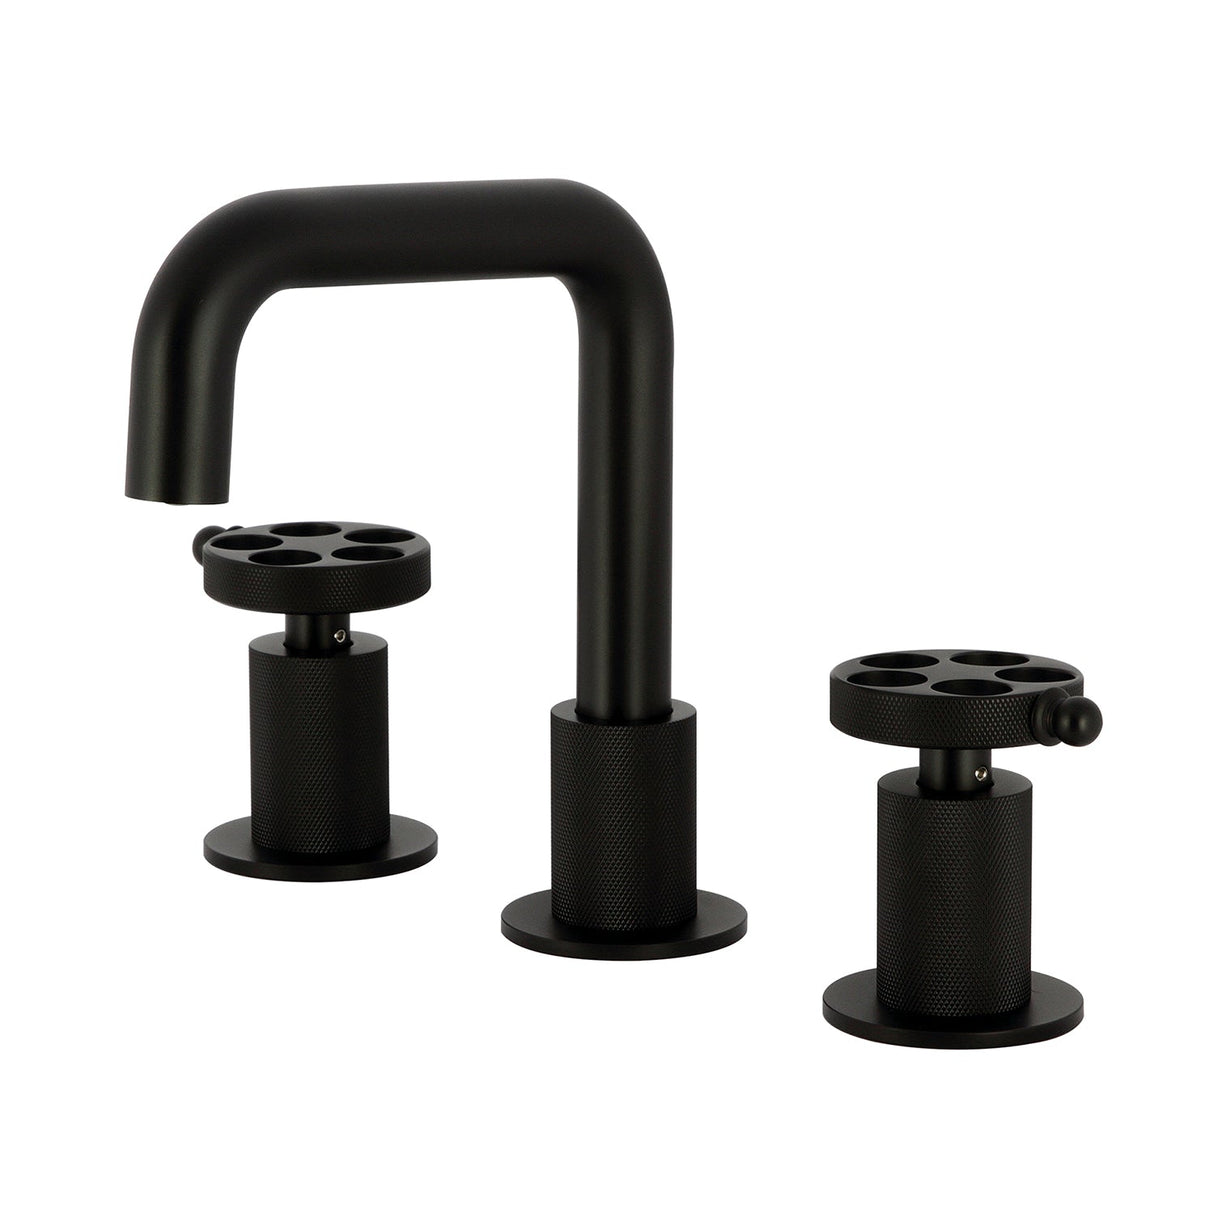 Wendell KS1410RKZ Two-Handle 3-Hole Deck Mount Widespread Bathroom Faucet with Knurled Handle and Push Pop-Up Drain, Matte Black